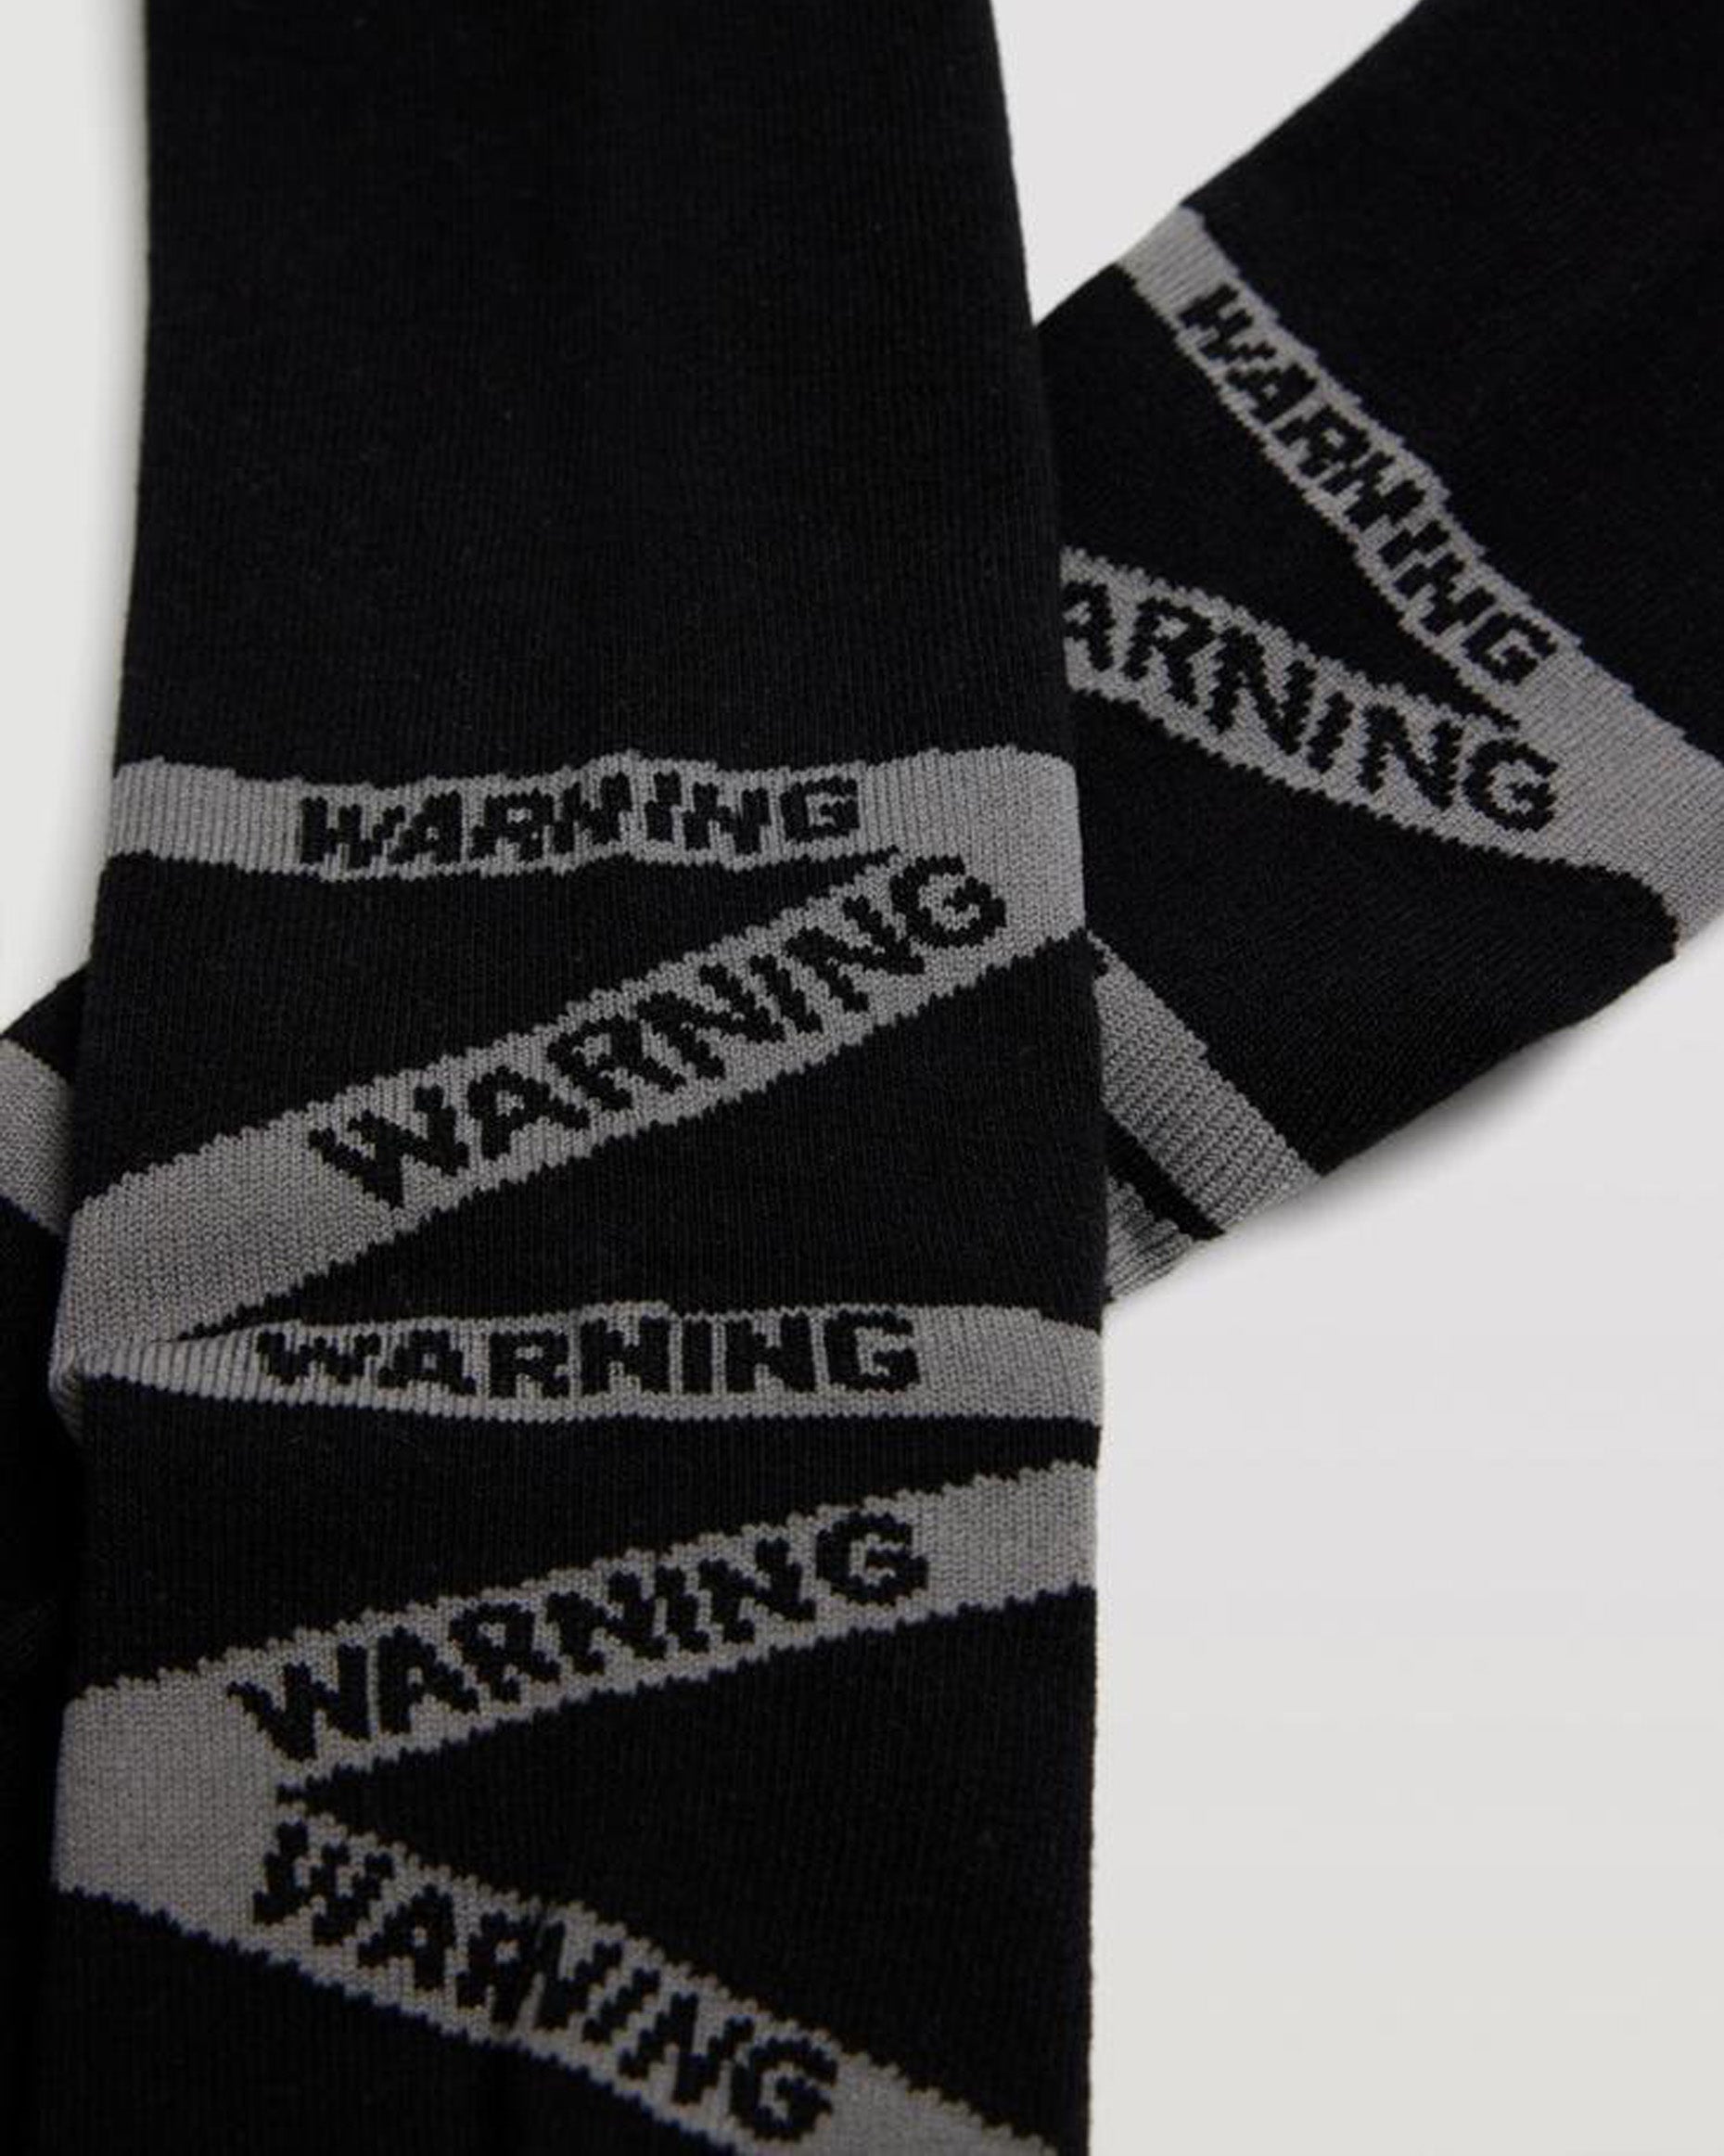 Ysabel Mora 22878 Warning Socks - Black cotton mix crew length ankle socks with grey warning tape style pattern wrapping around the foot.